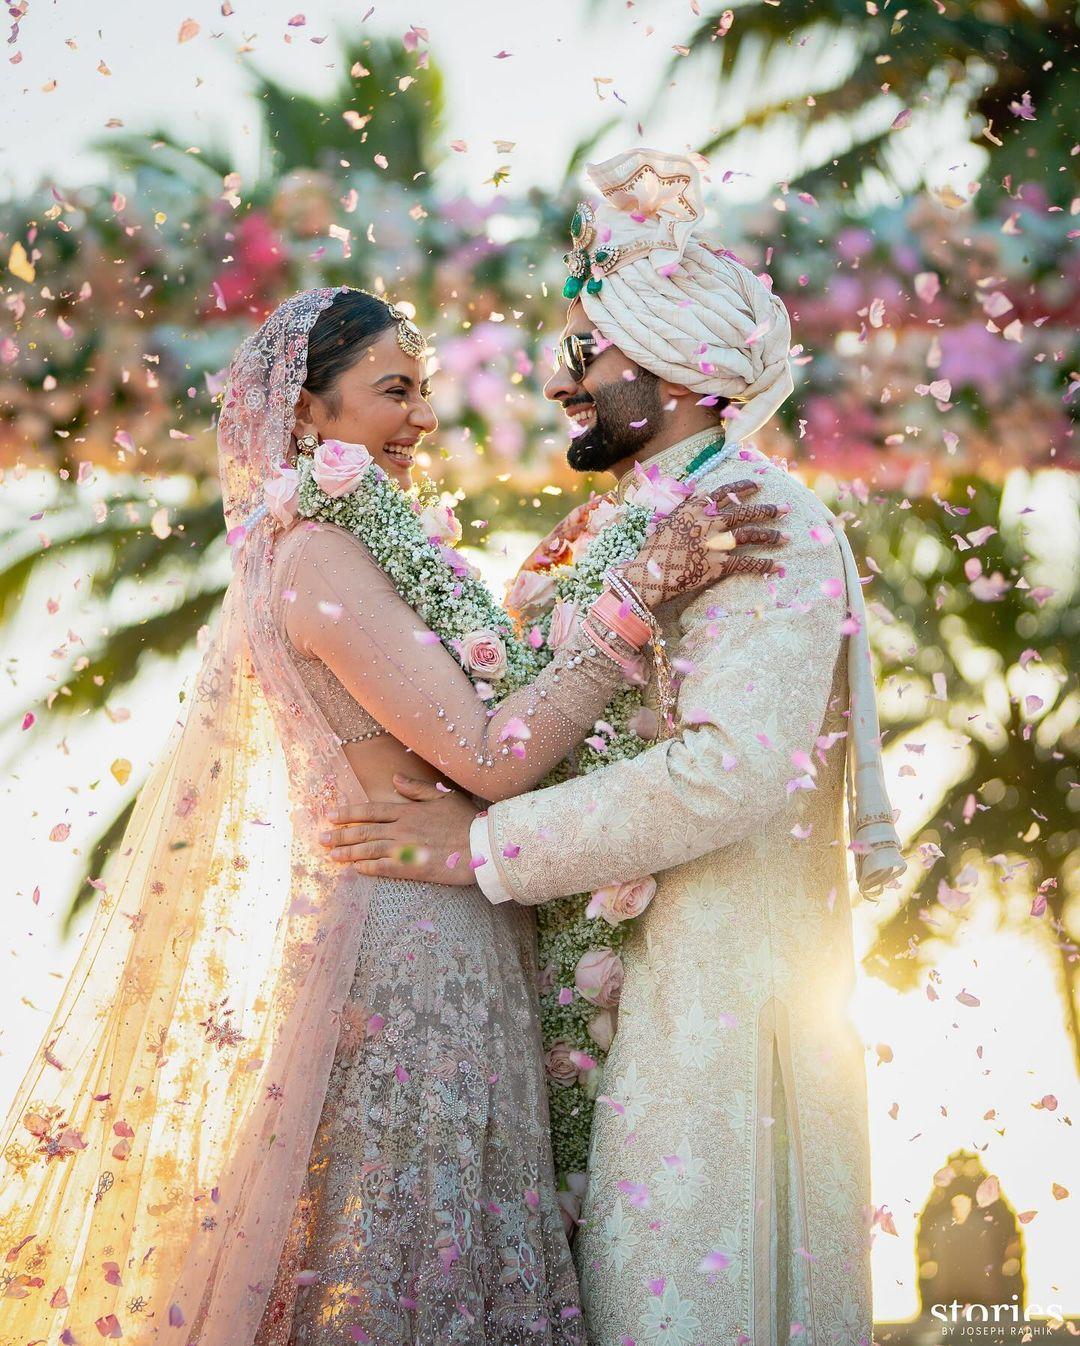 On Wednesday evening, Rakul and Jackky dropped their first wedding pictures. They looked happy and stunning in the dreamy set up of the wedding location.